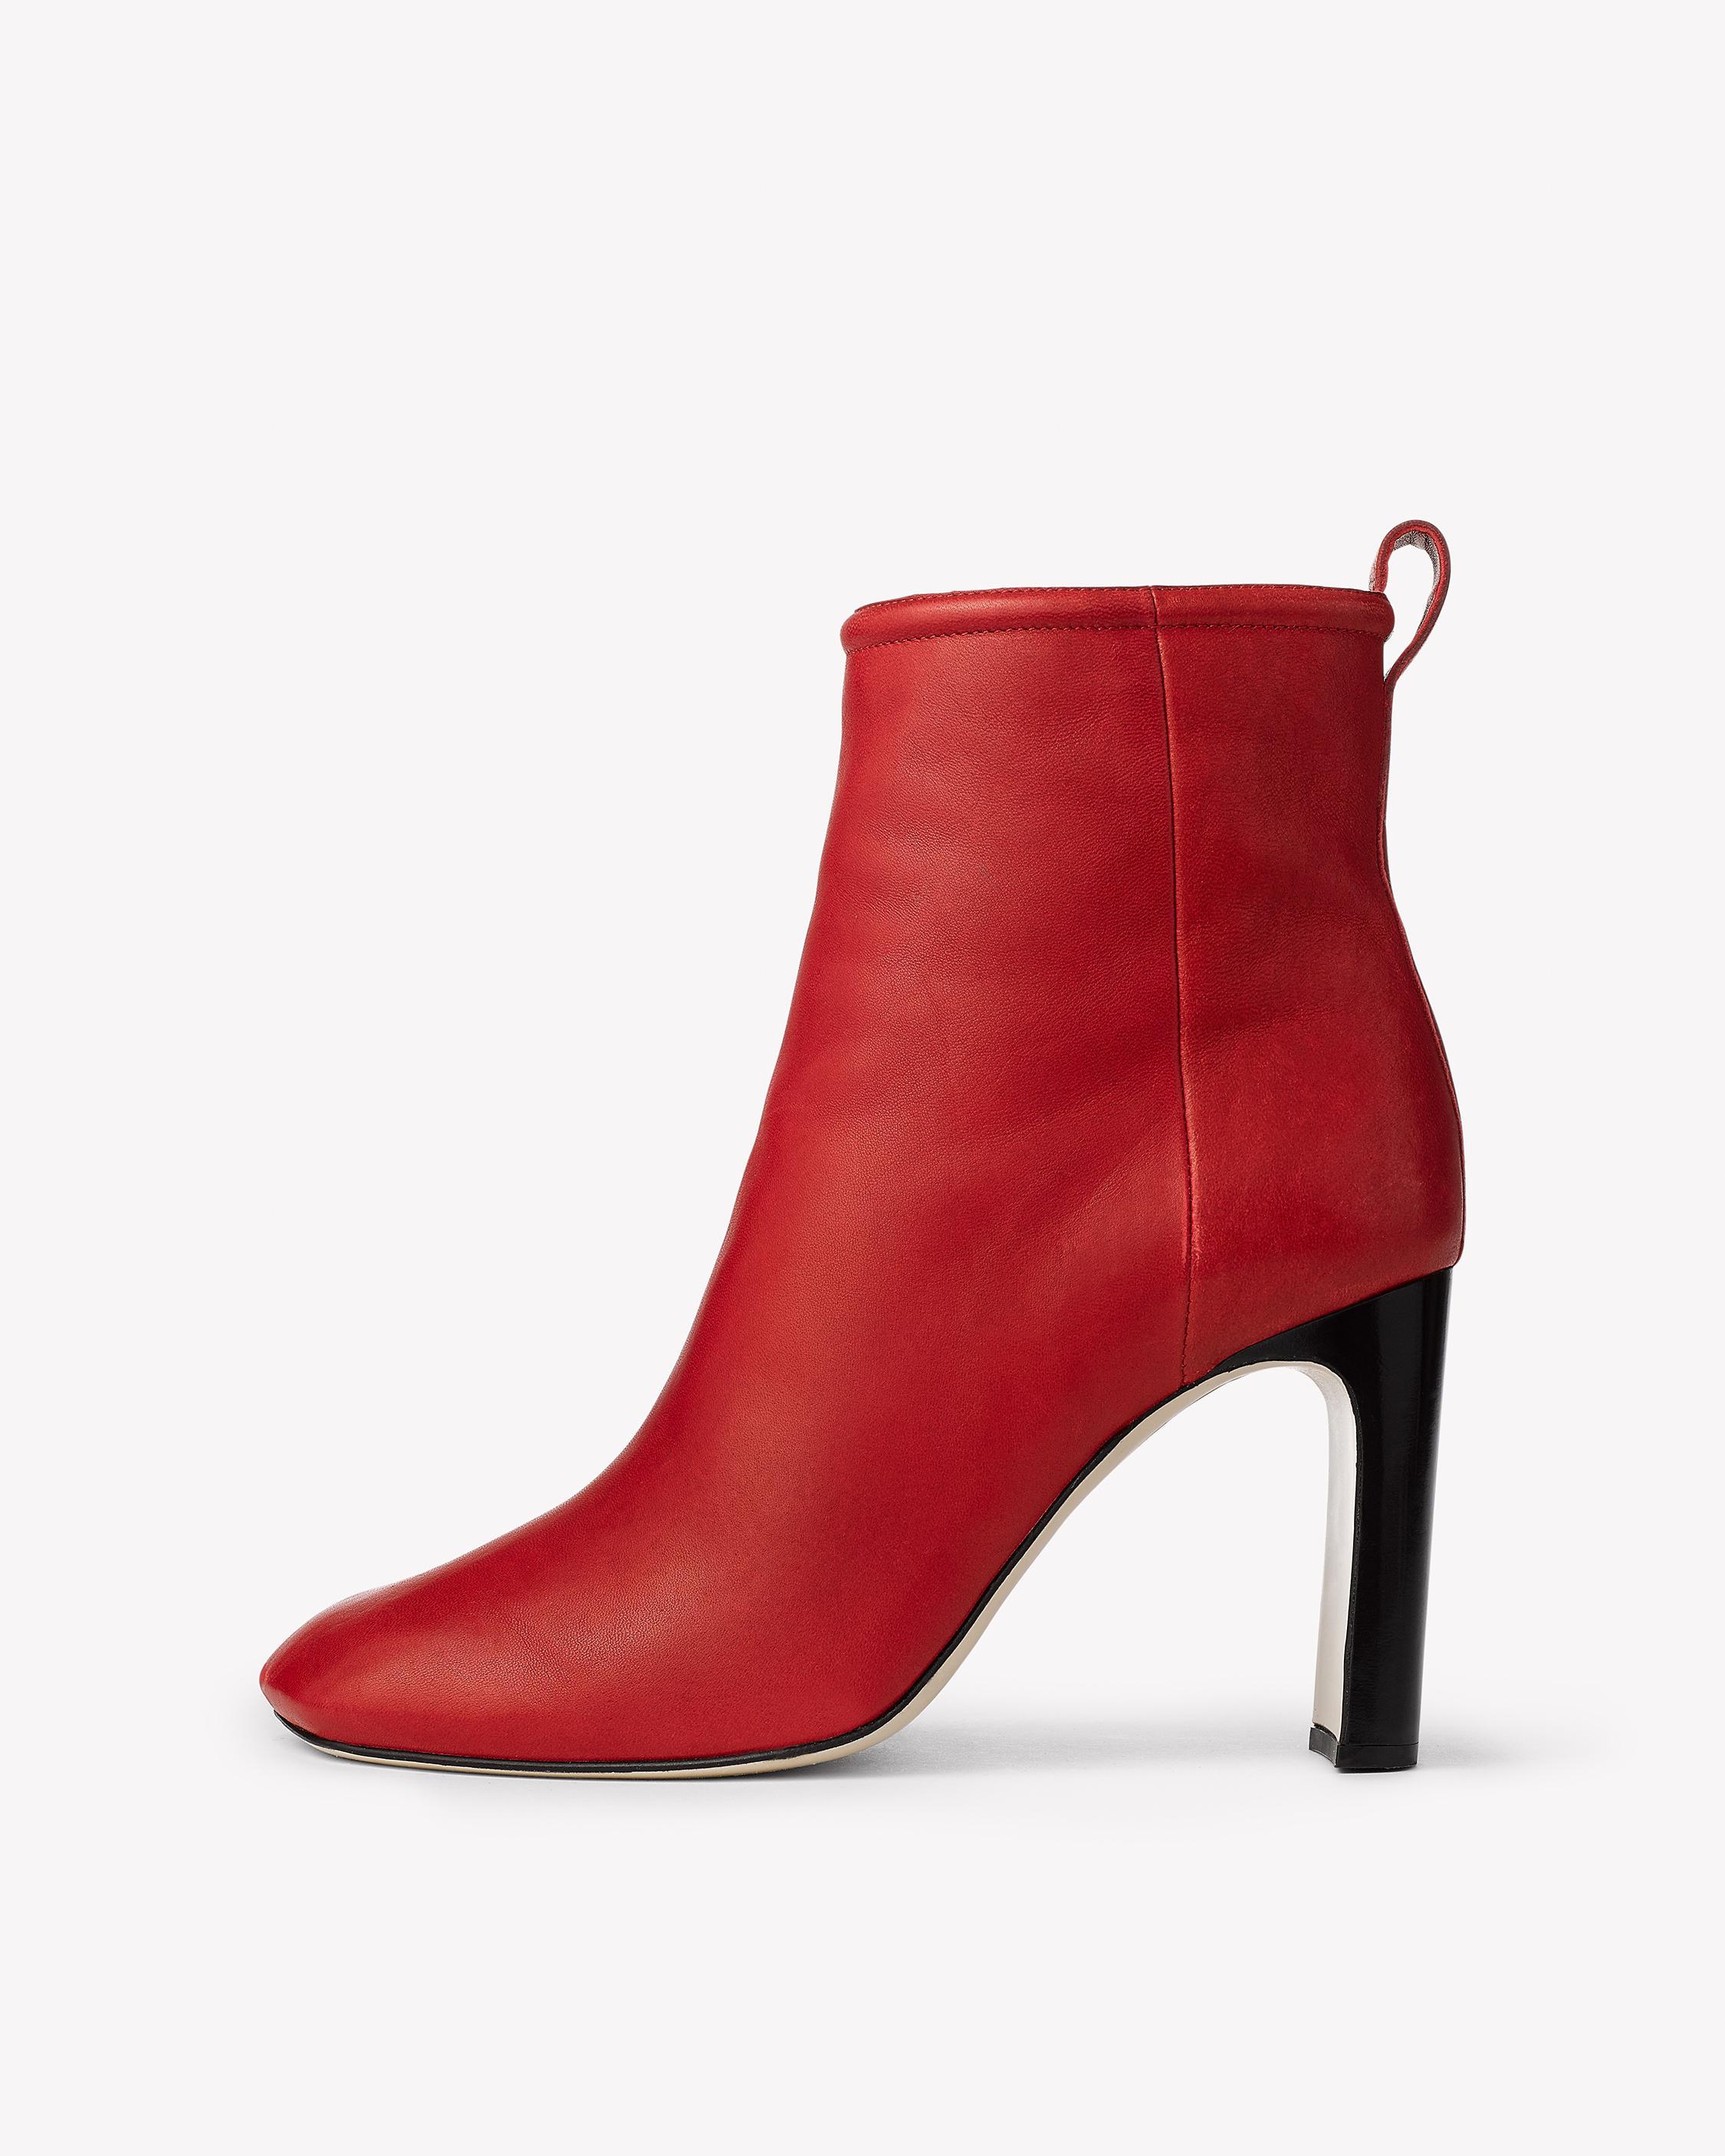 Rag & Bone Ellis Leather Ankle Boots in Red - Lyst